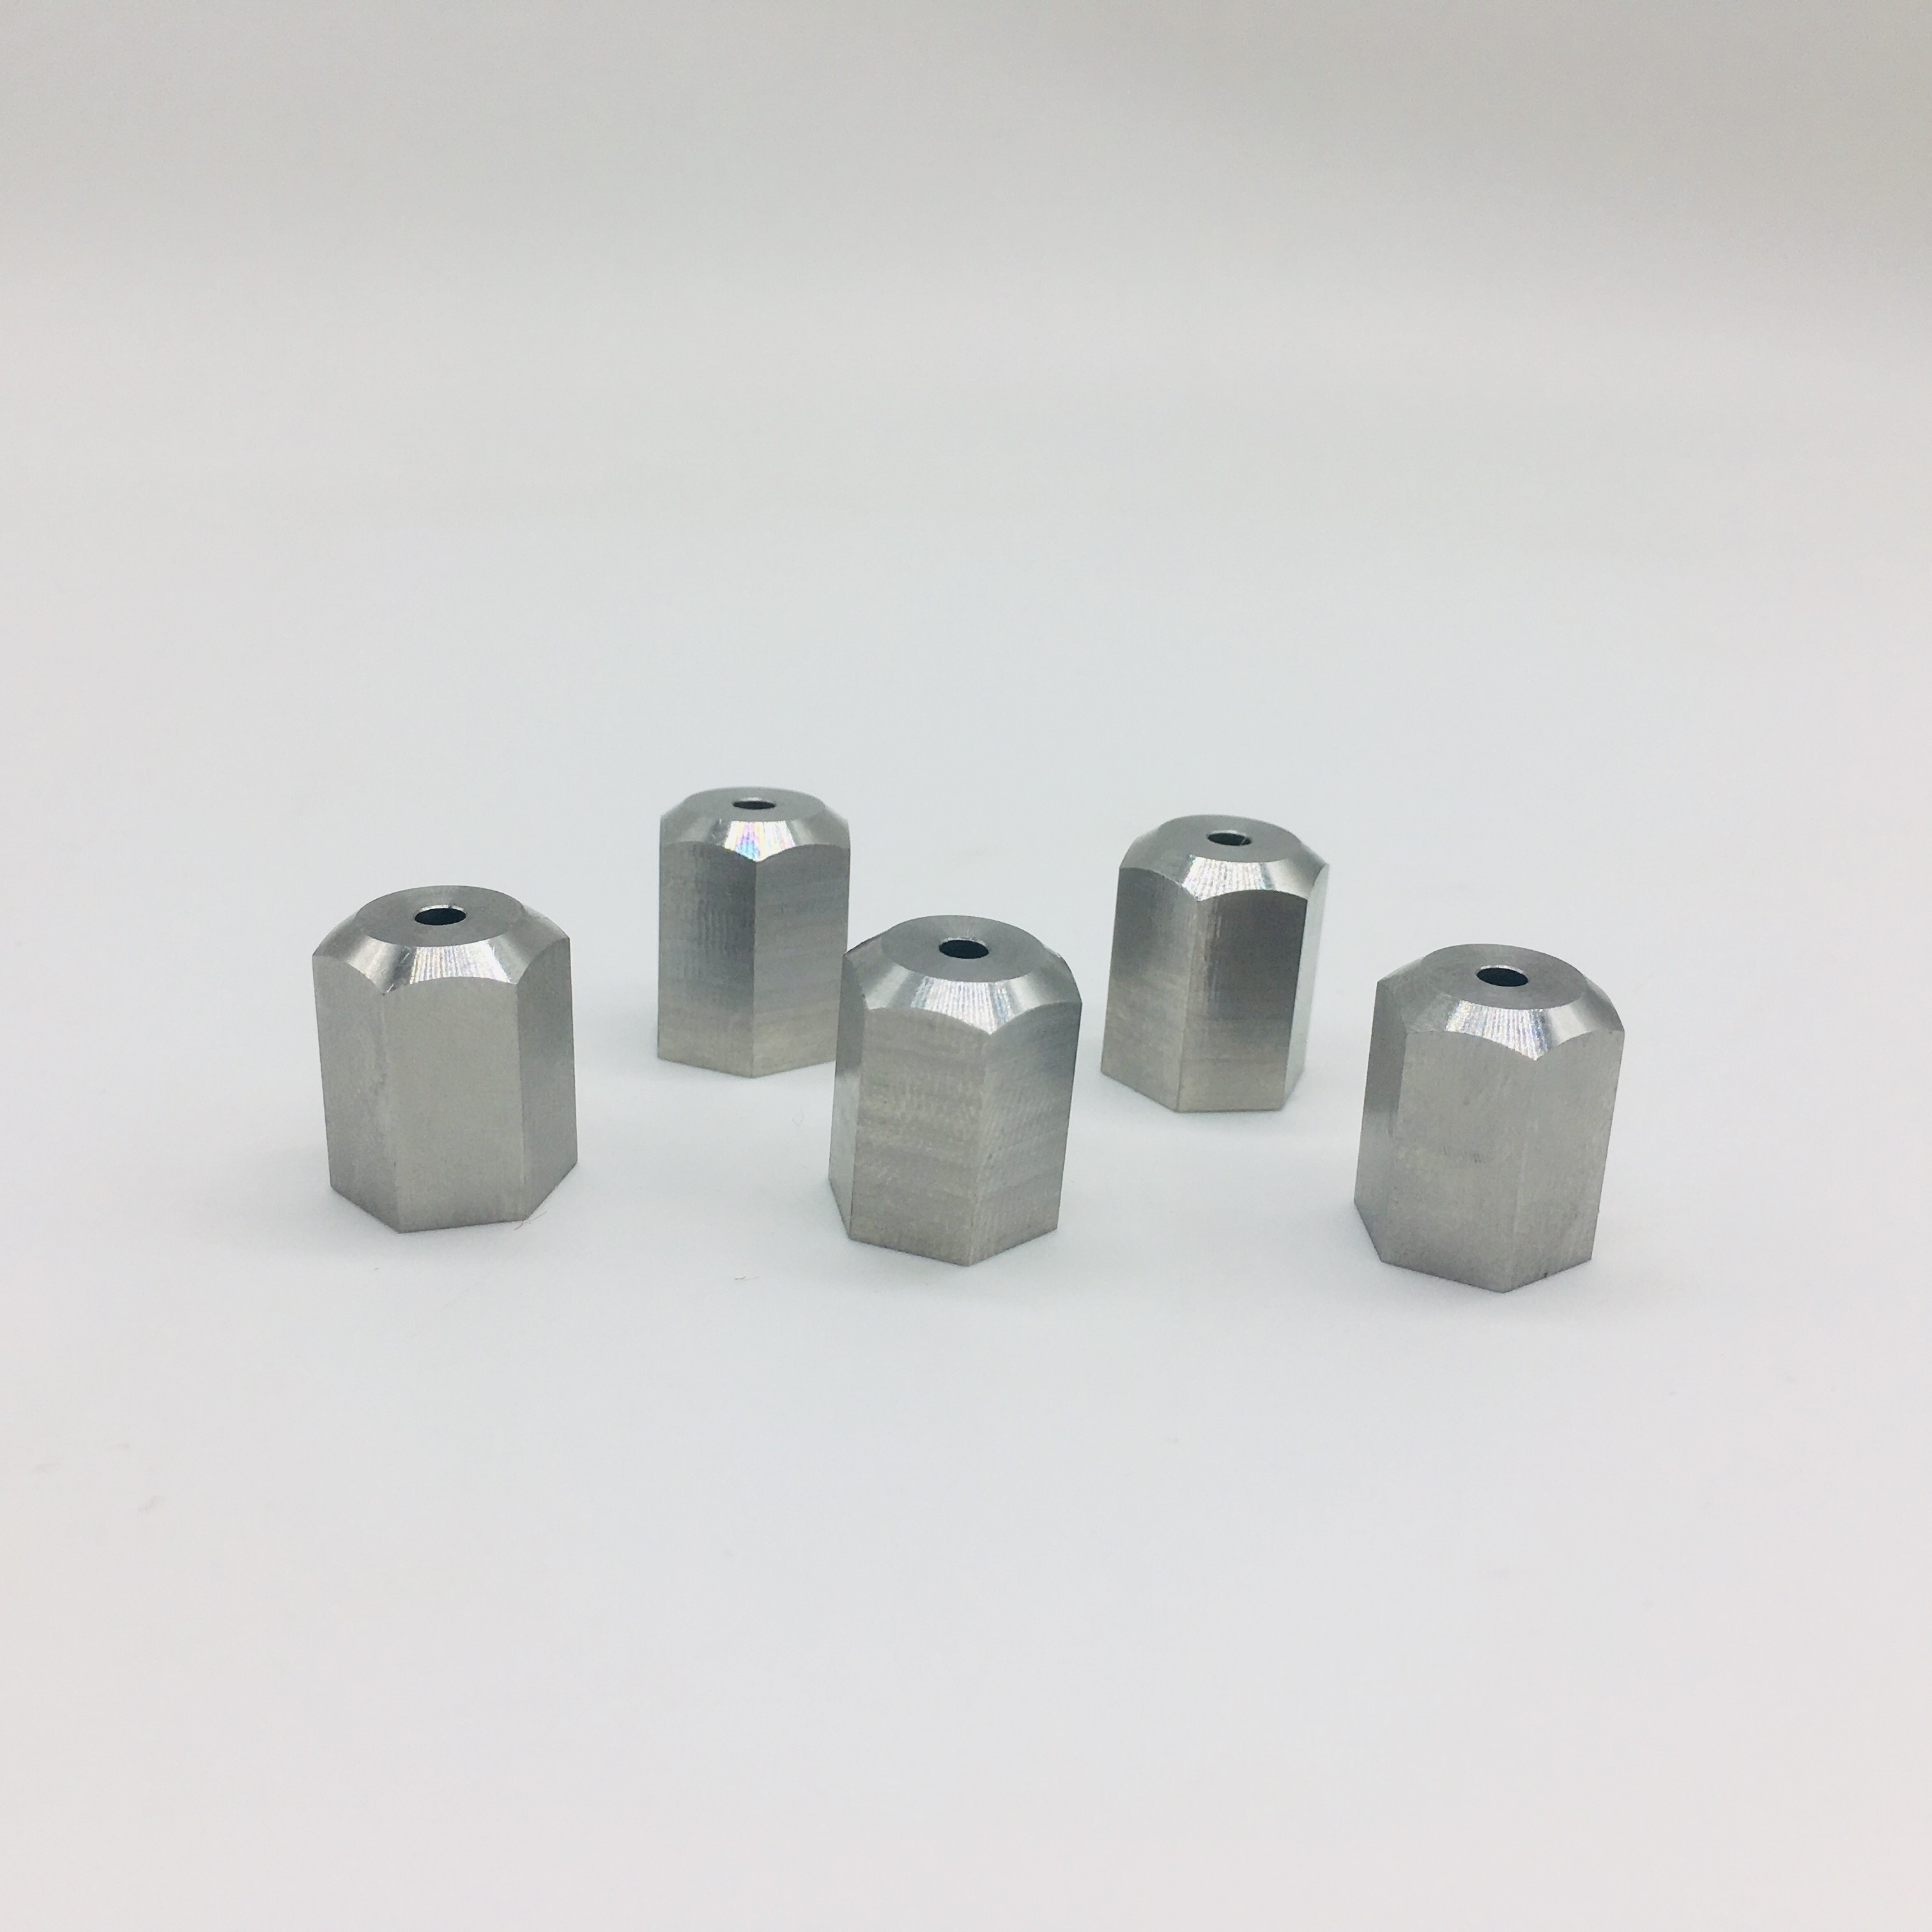 Made in China CNC machine tool turning piece stainless steel processing manufacturing hexagon nut surface passivation